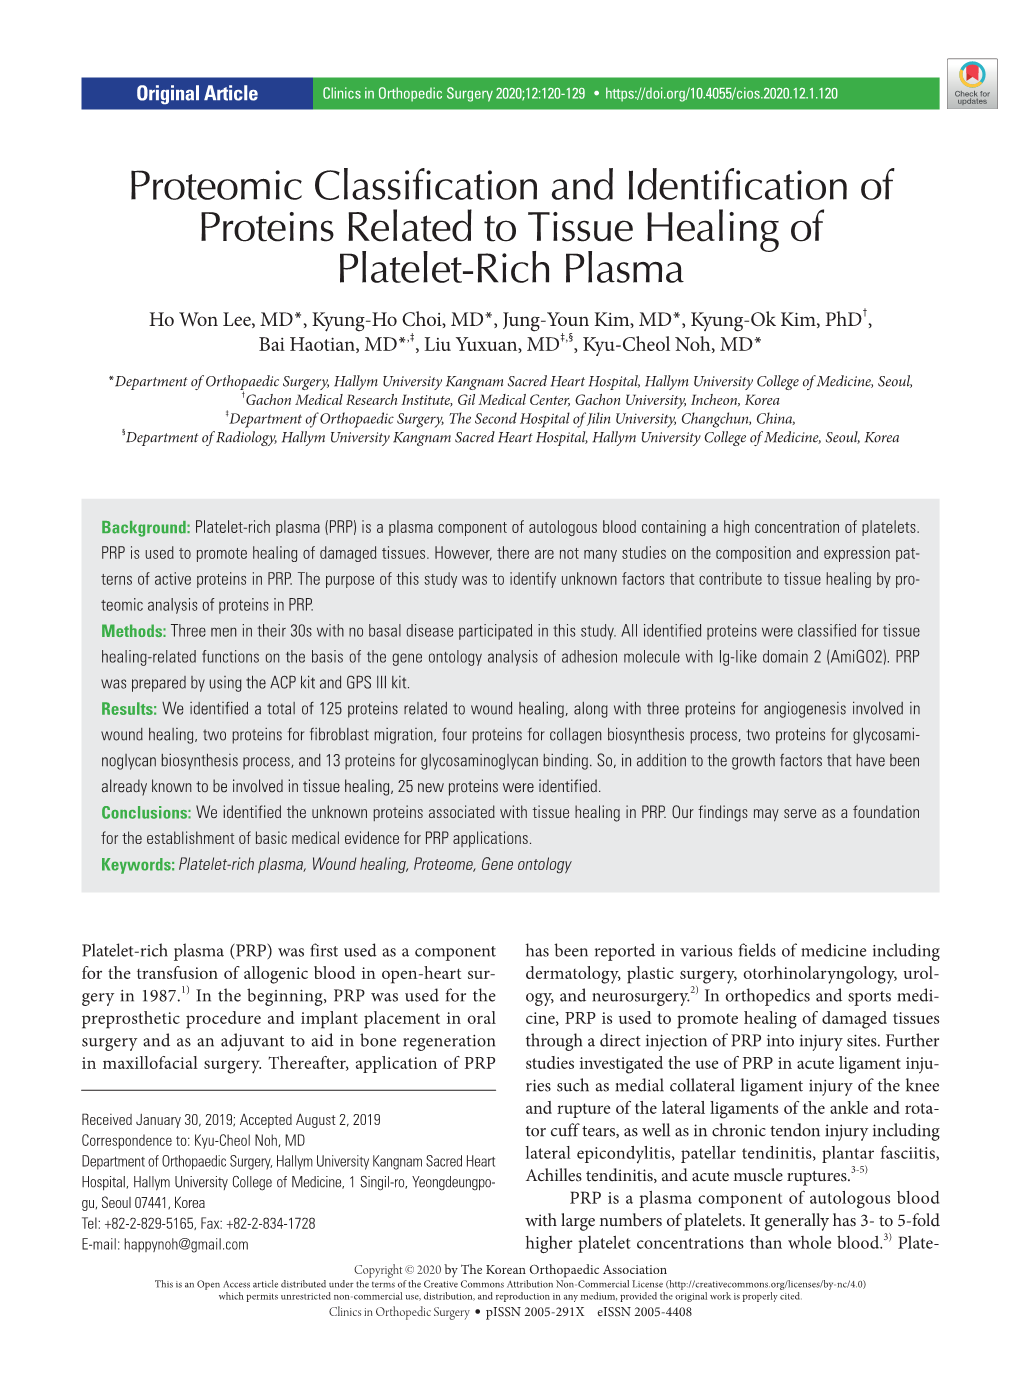 Proteomic Classification and Identification of Proteins Related to Tissue Healing of Platelet-Rich Plasma